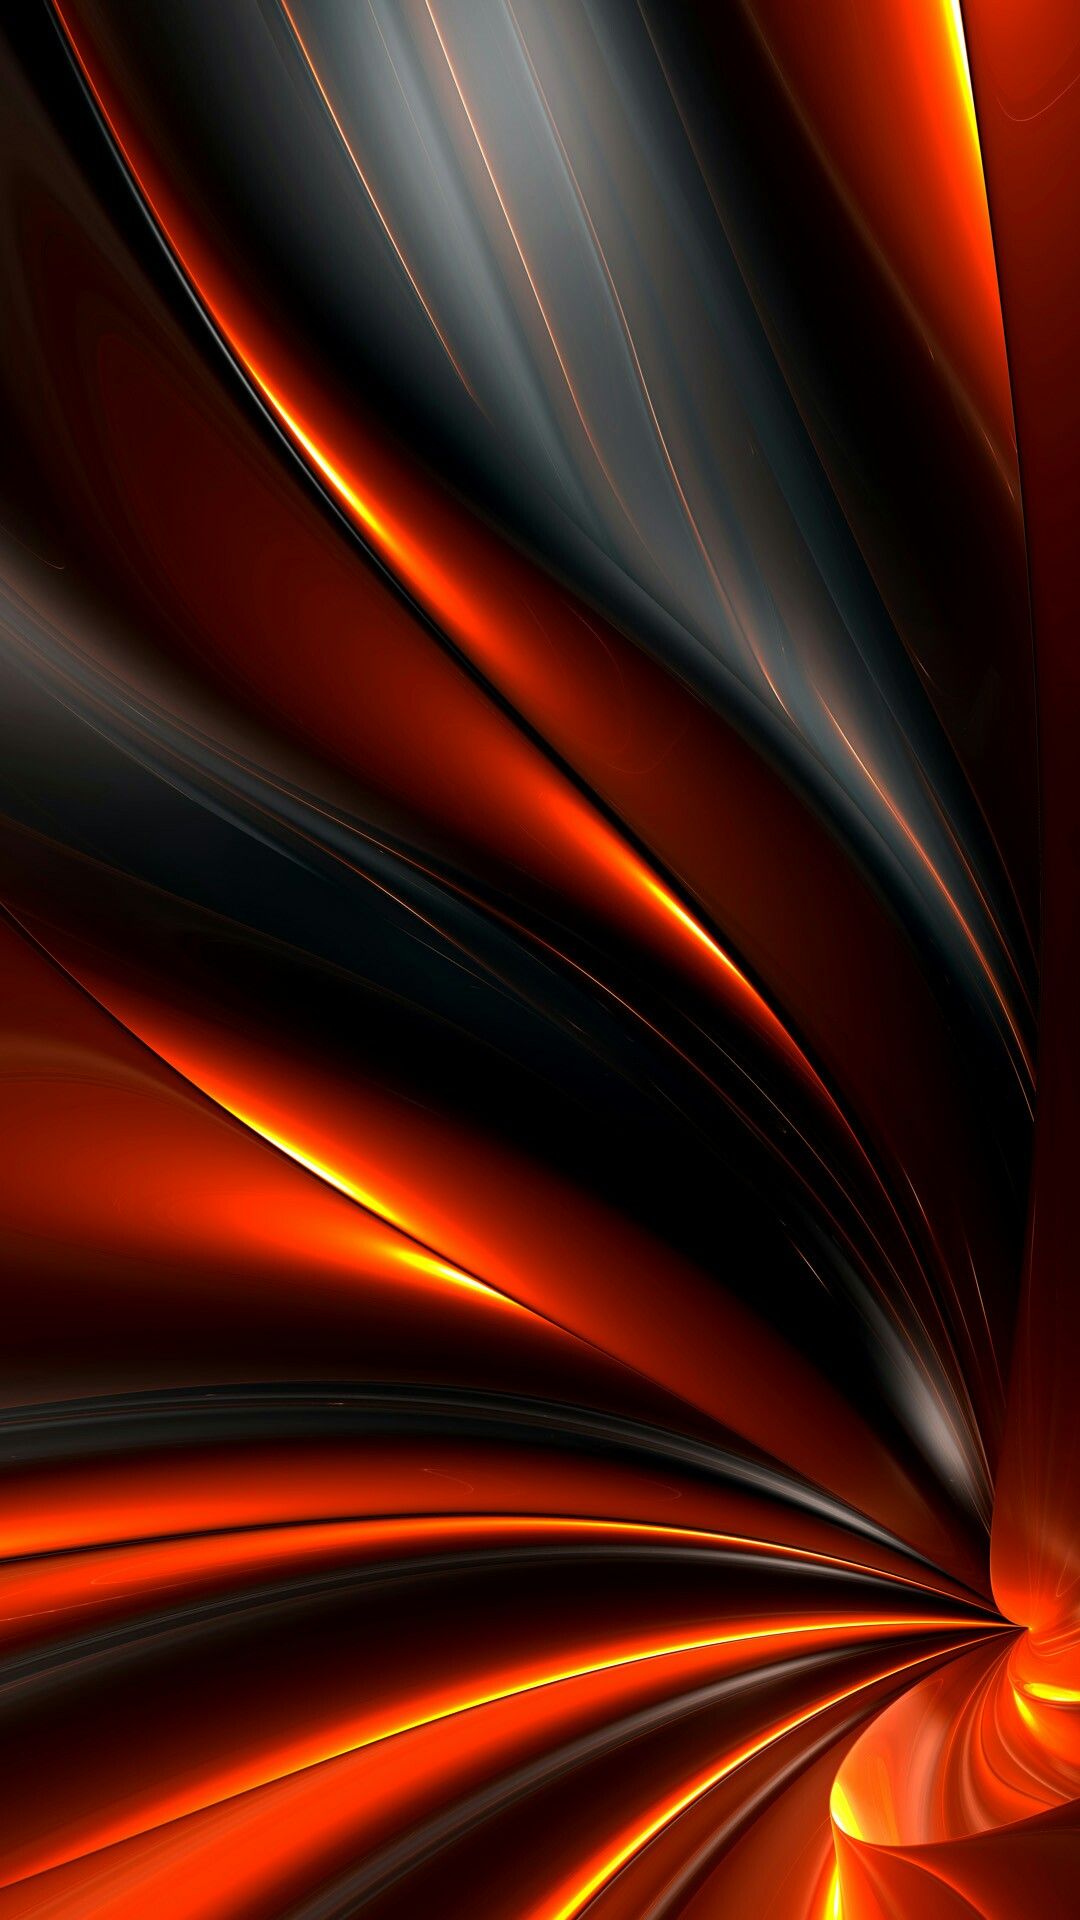 abstract iphone wallpaper,red,orange,black,brown,close up